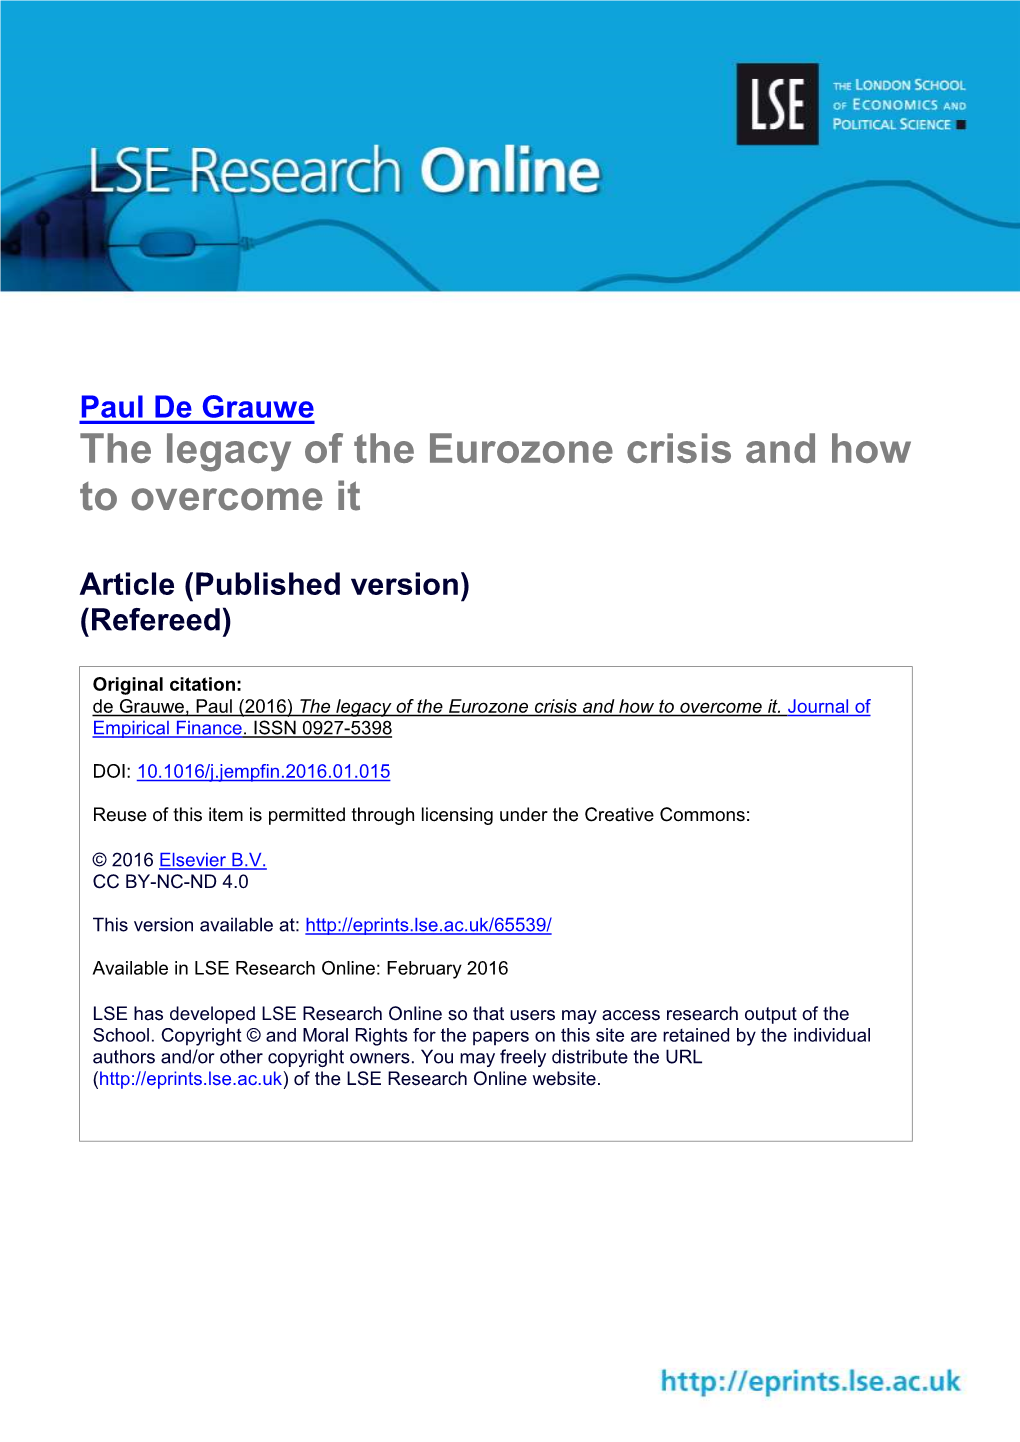 The Legacy of the Eurozone Crisis and How to Overcome It